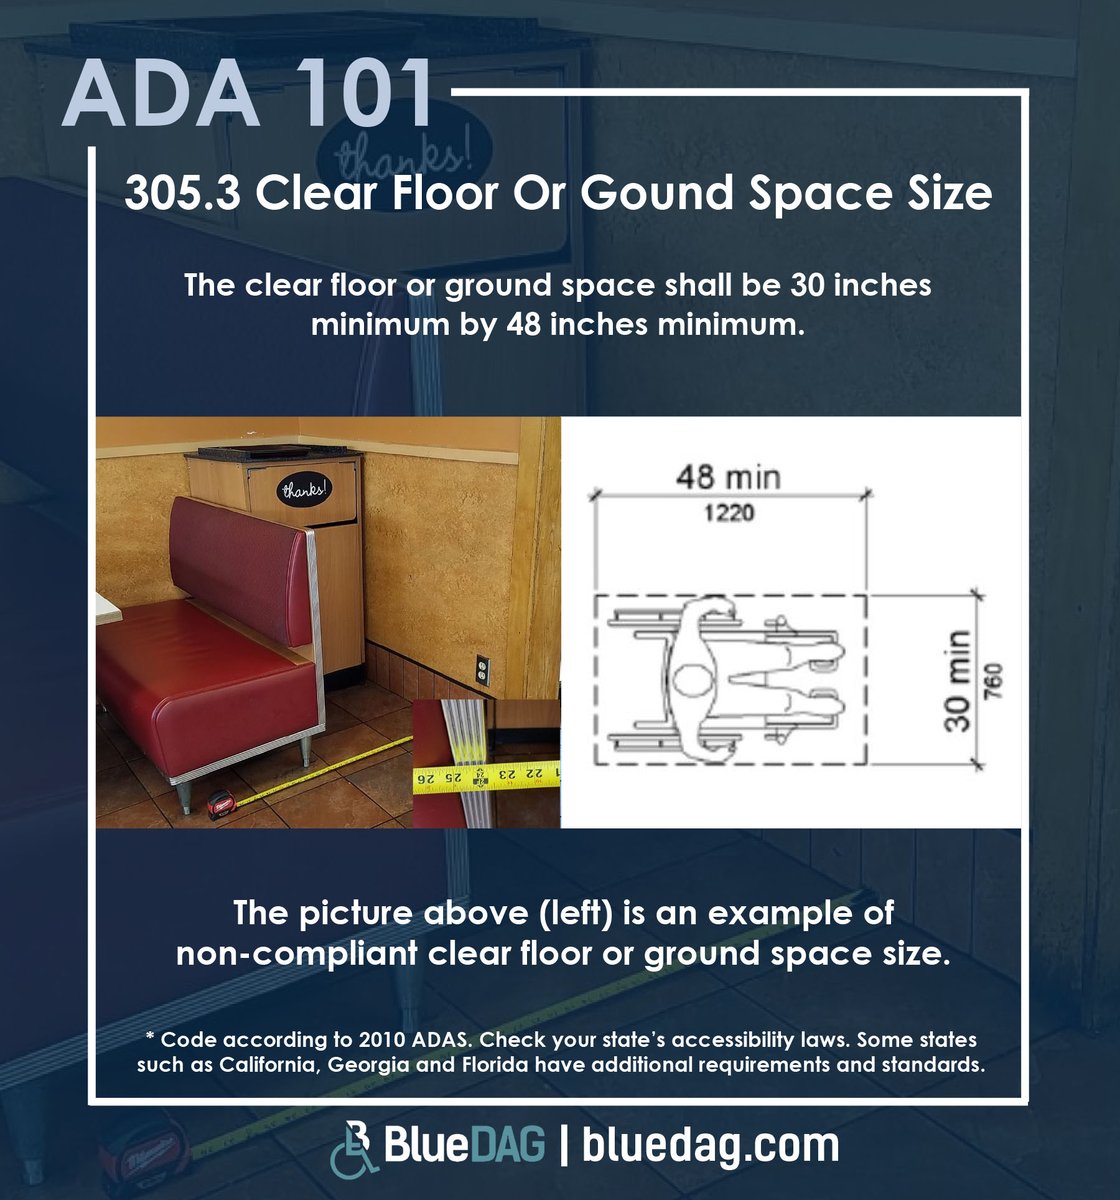 ADA 101 305.3 Clear Floor Space Size #accessibility #ada #americanswithdisabilitiesact #accessibilityforall #abilitynotdisability #adasolutions #adaupgrades